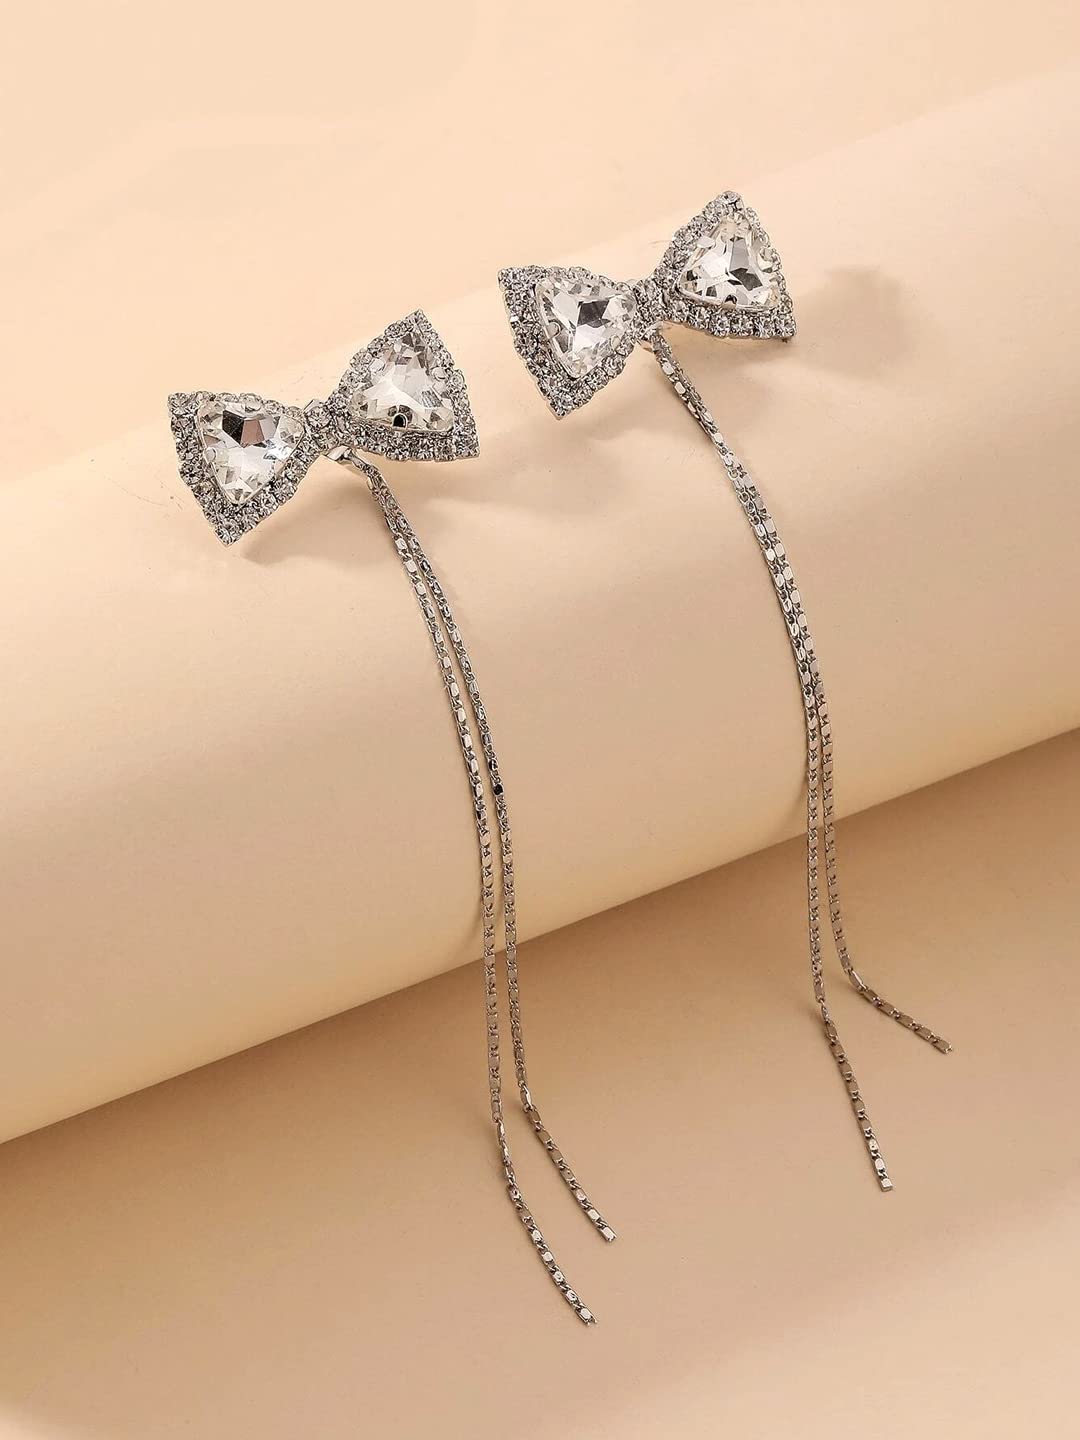 Yellow Chimes Earrings For Women Silver Tone Crystal Studded Bow With Linear Chain Tassel Dangler Earrings For Women and Girls